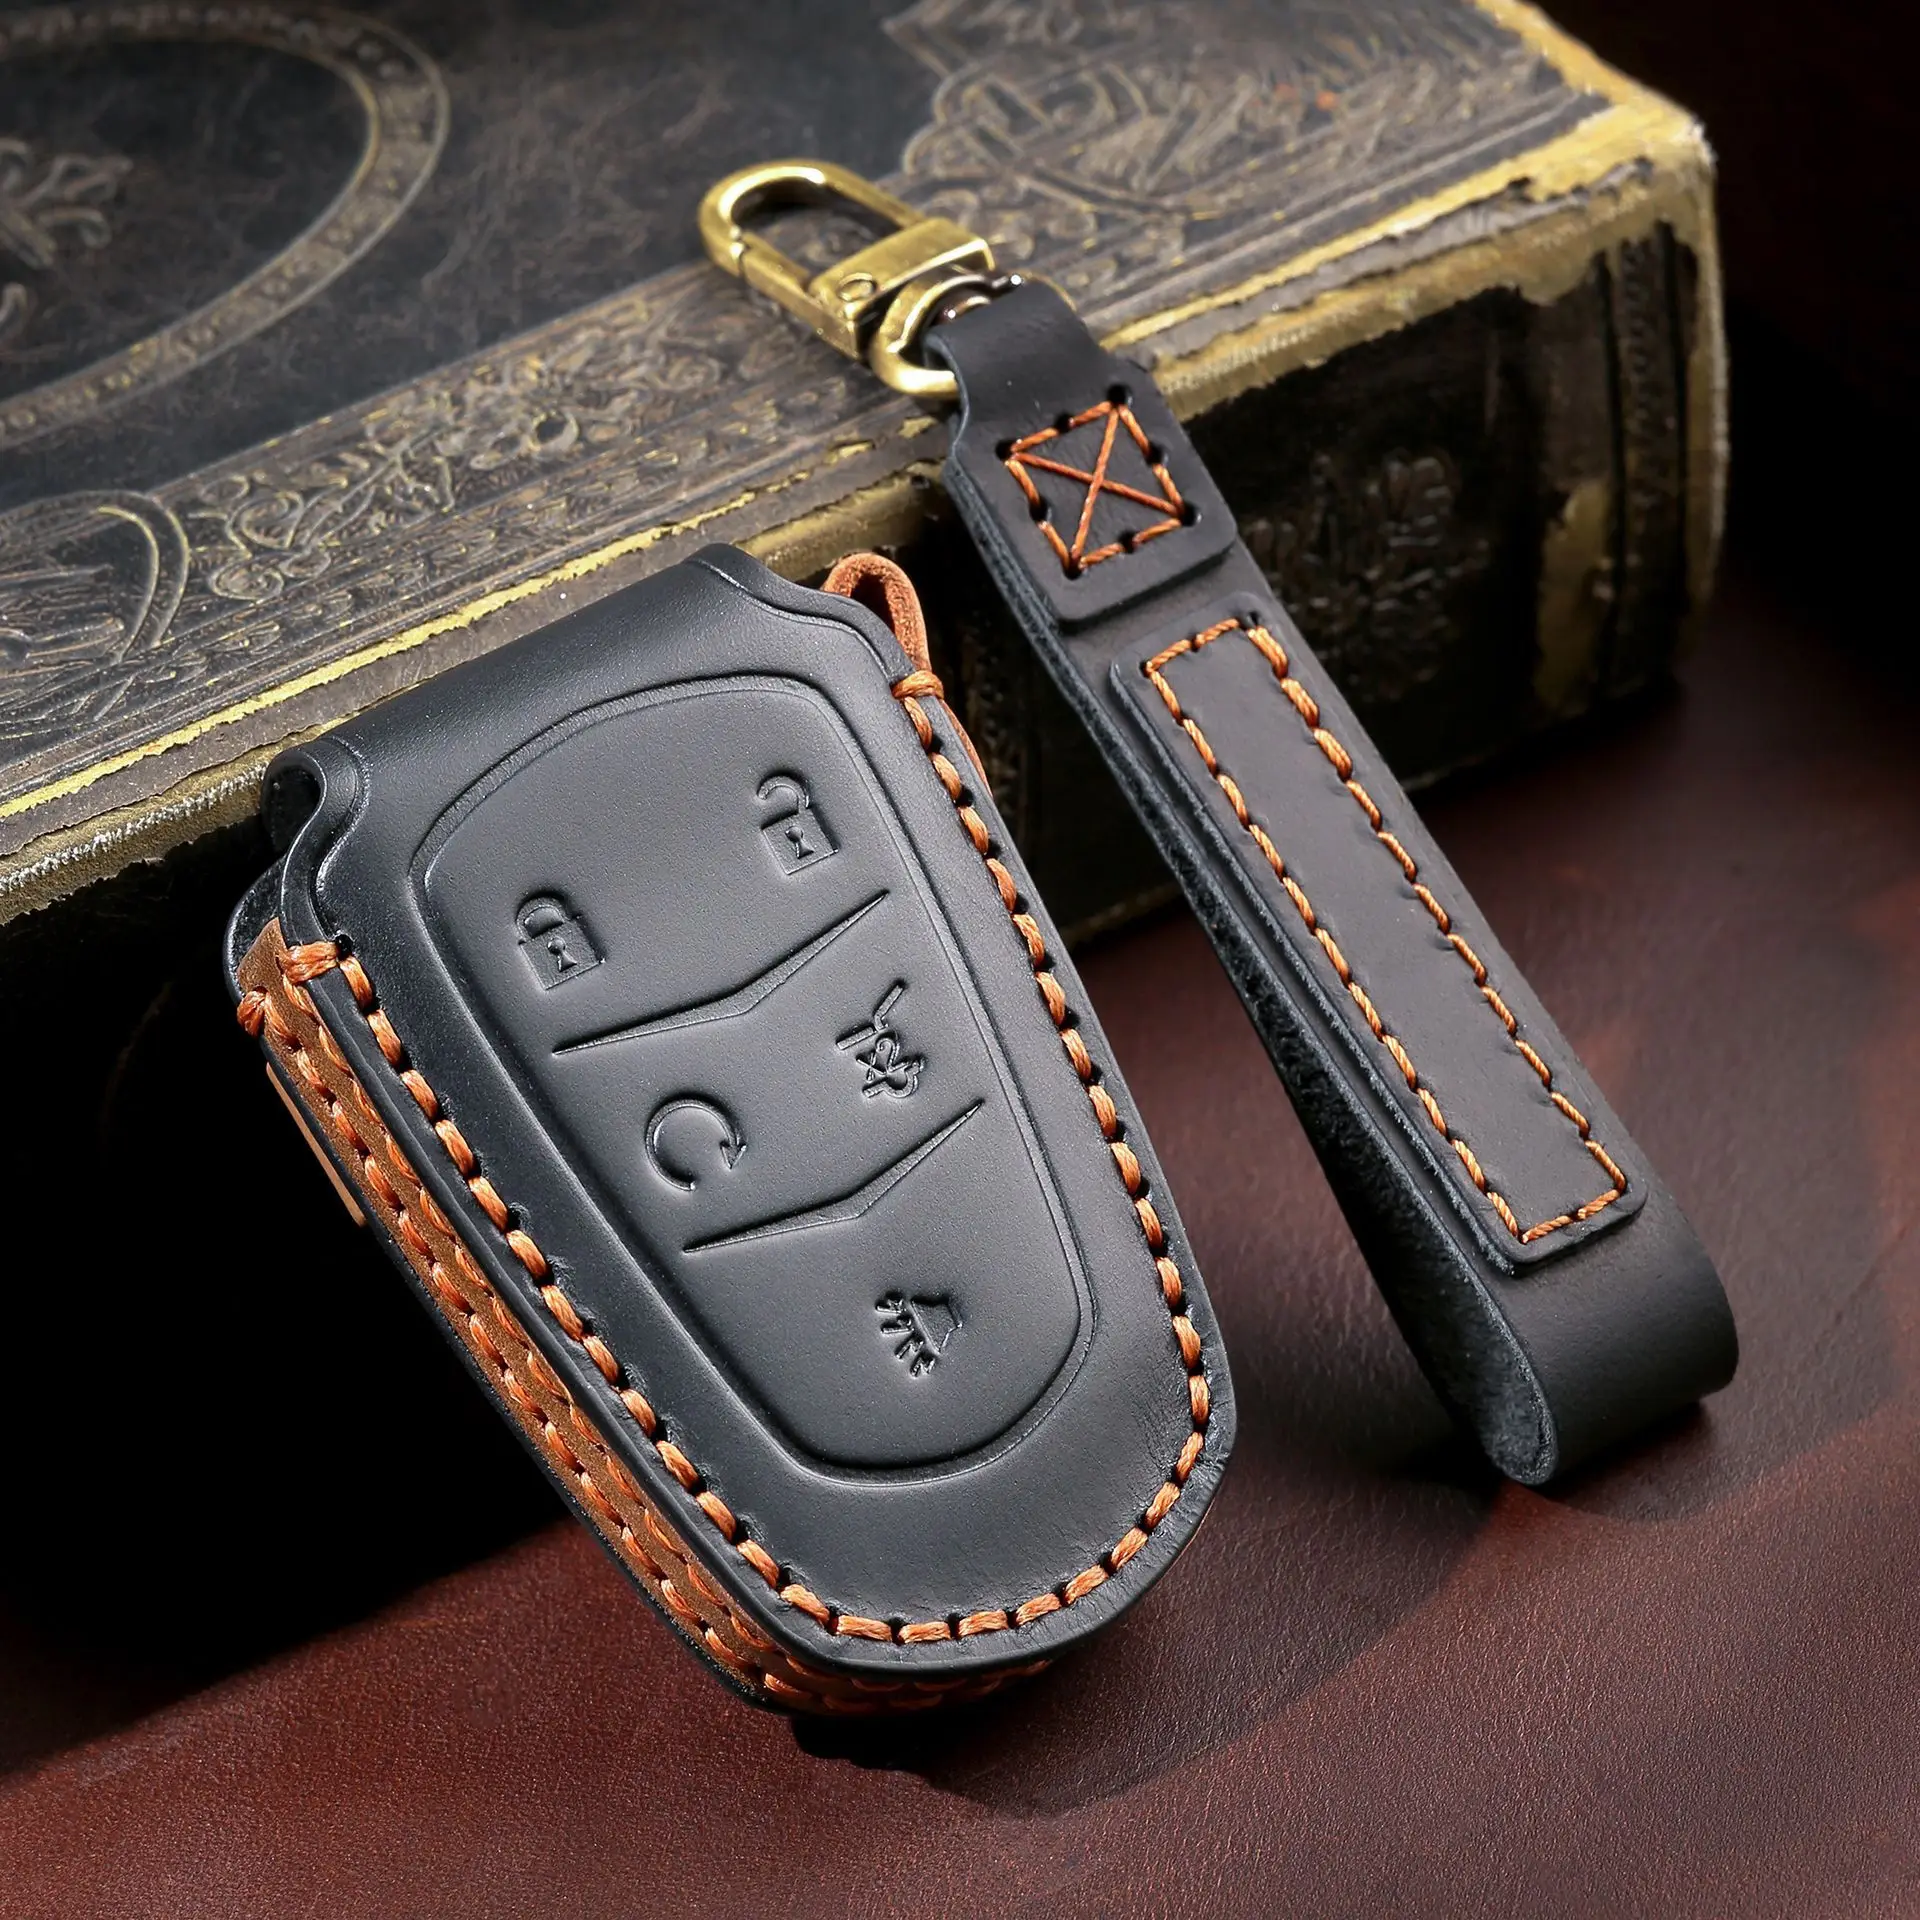 

4 5 Button Genuine Leather Car Key Cover Case Fob Keyring Shell for Cadillac ATS CT6 CTS DTS XT5 Escalade ESV SRX STS XTS ELR